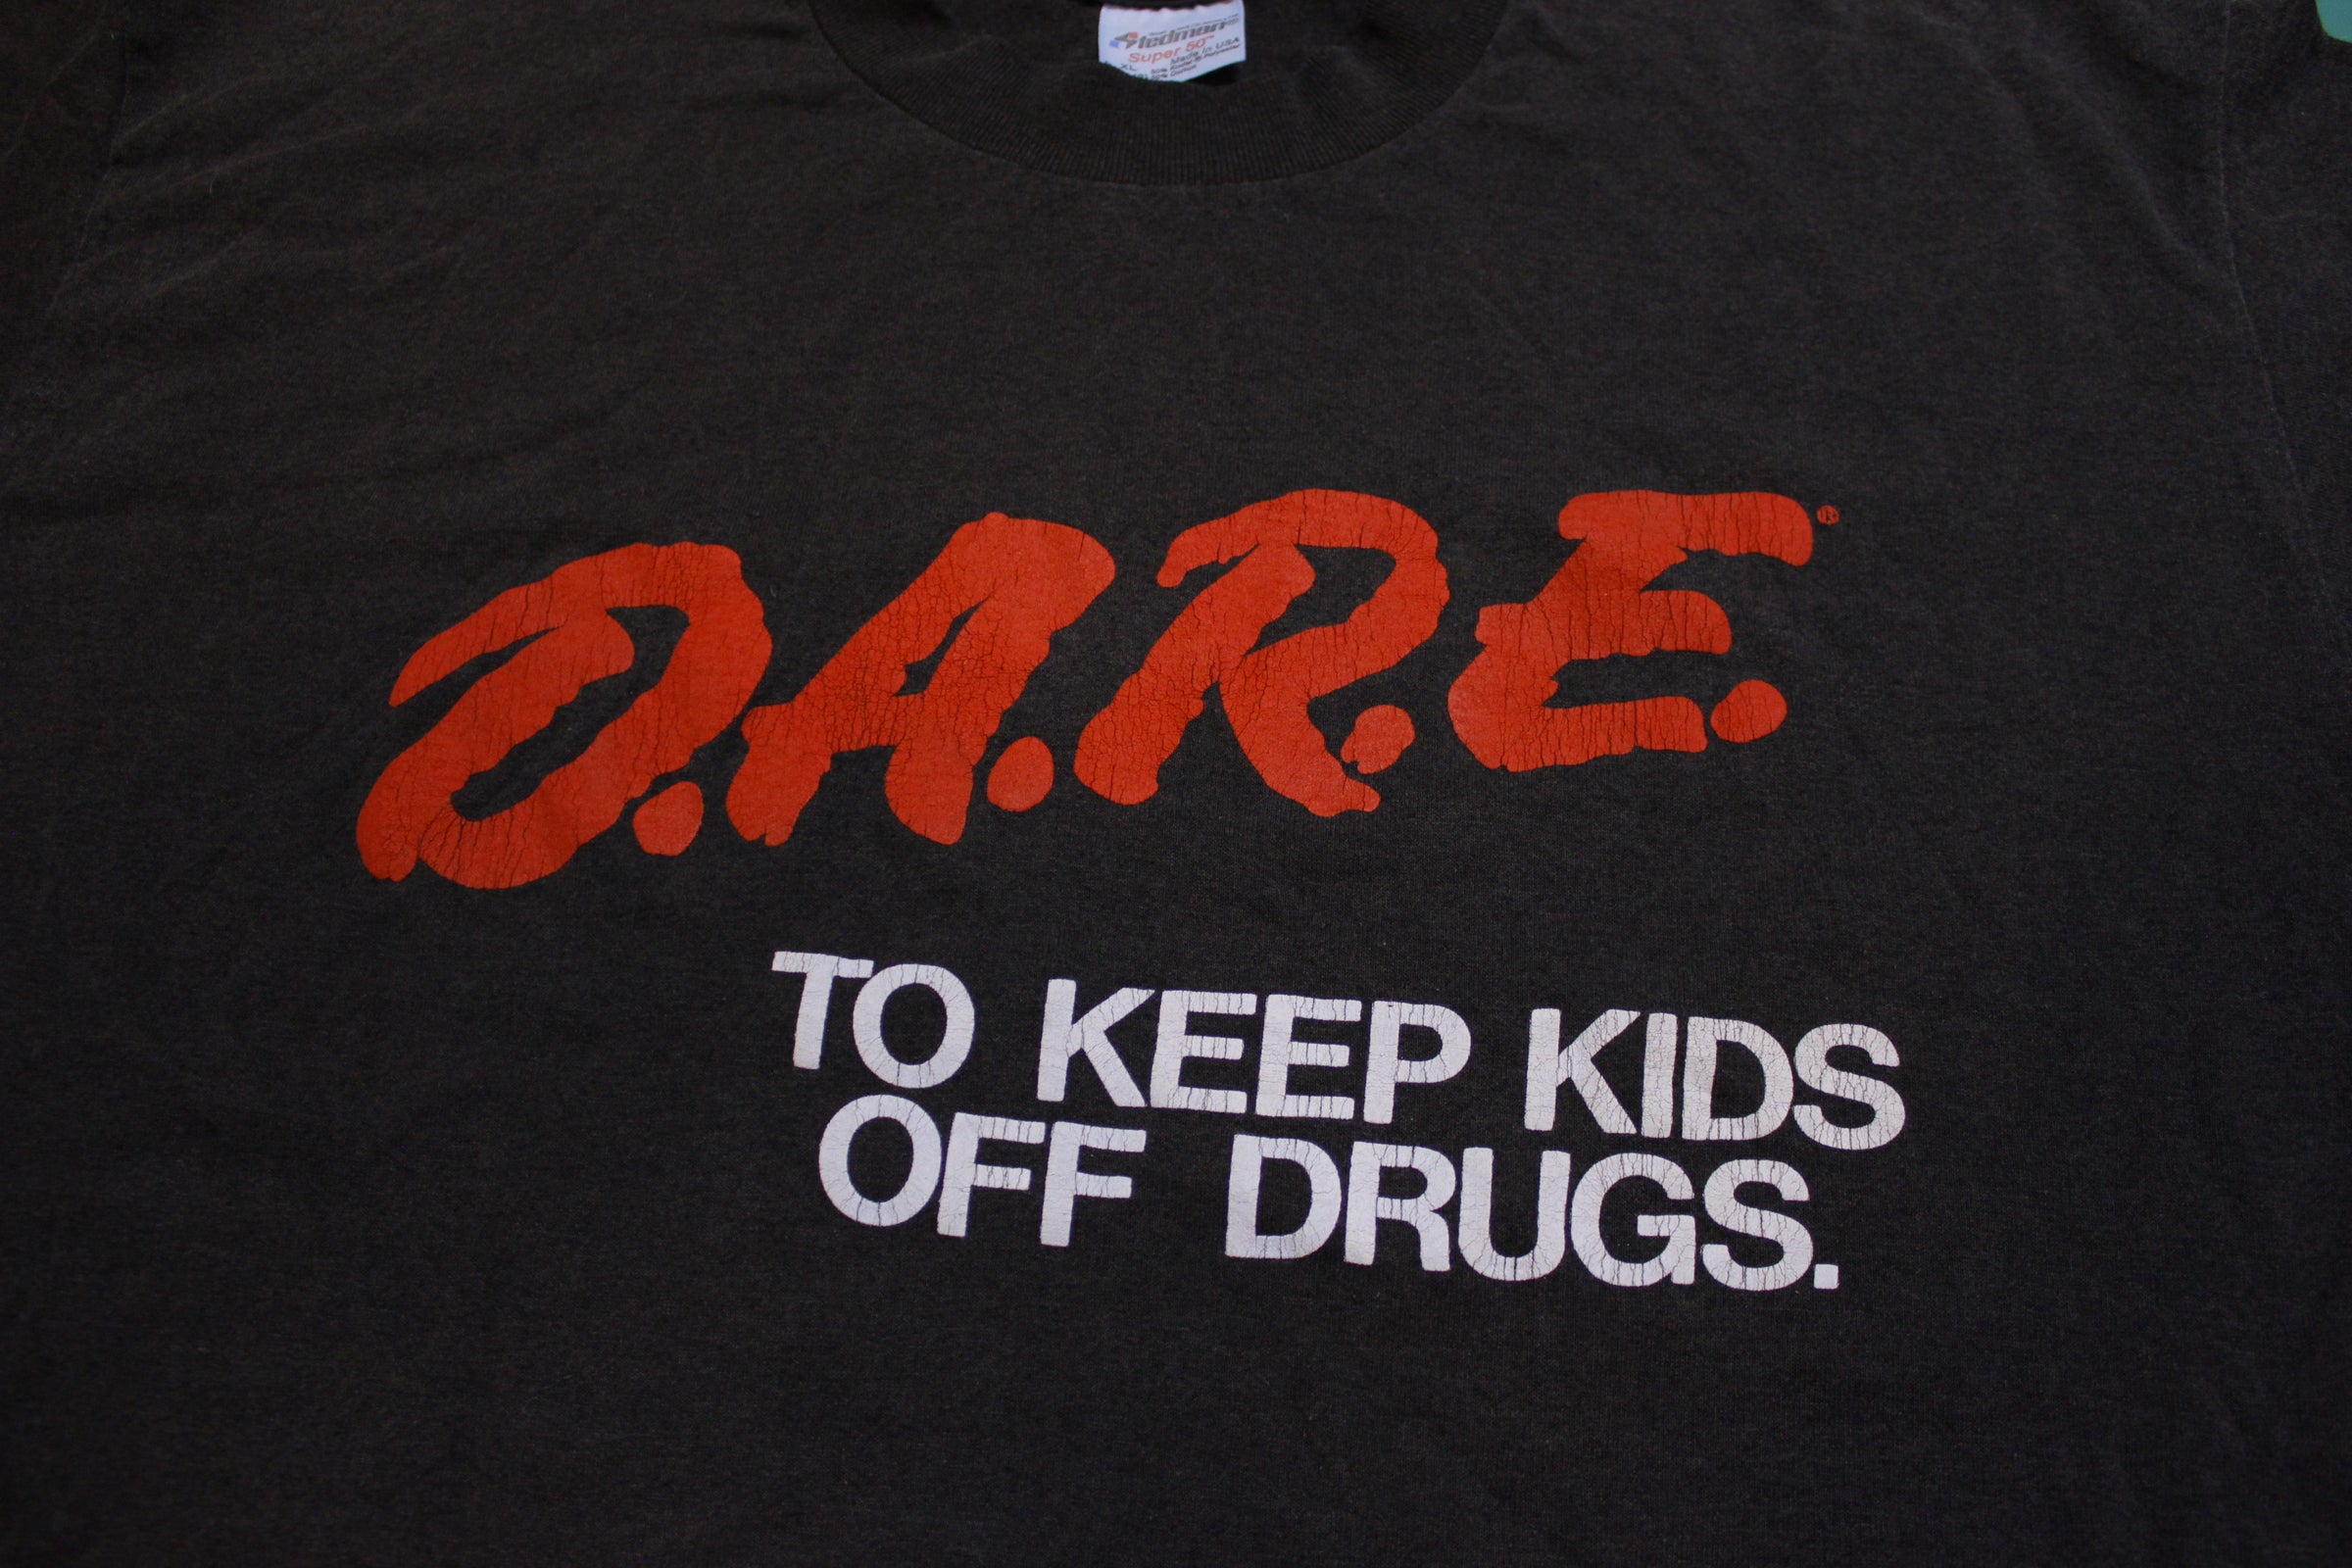 Changes Dare D.A.R.E Distressed Keeping Kids Off Drugs 80s Style Retro T Shirt 30-19 - 3XL